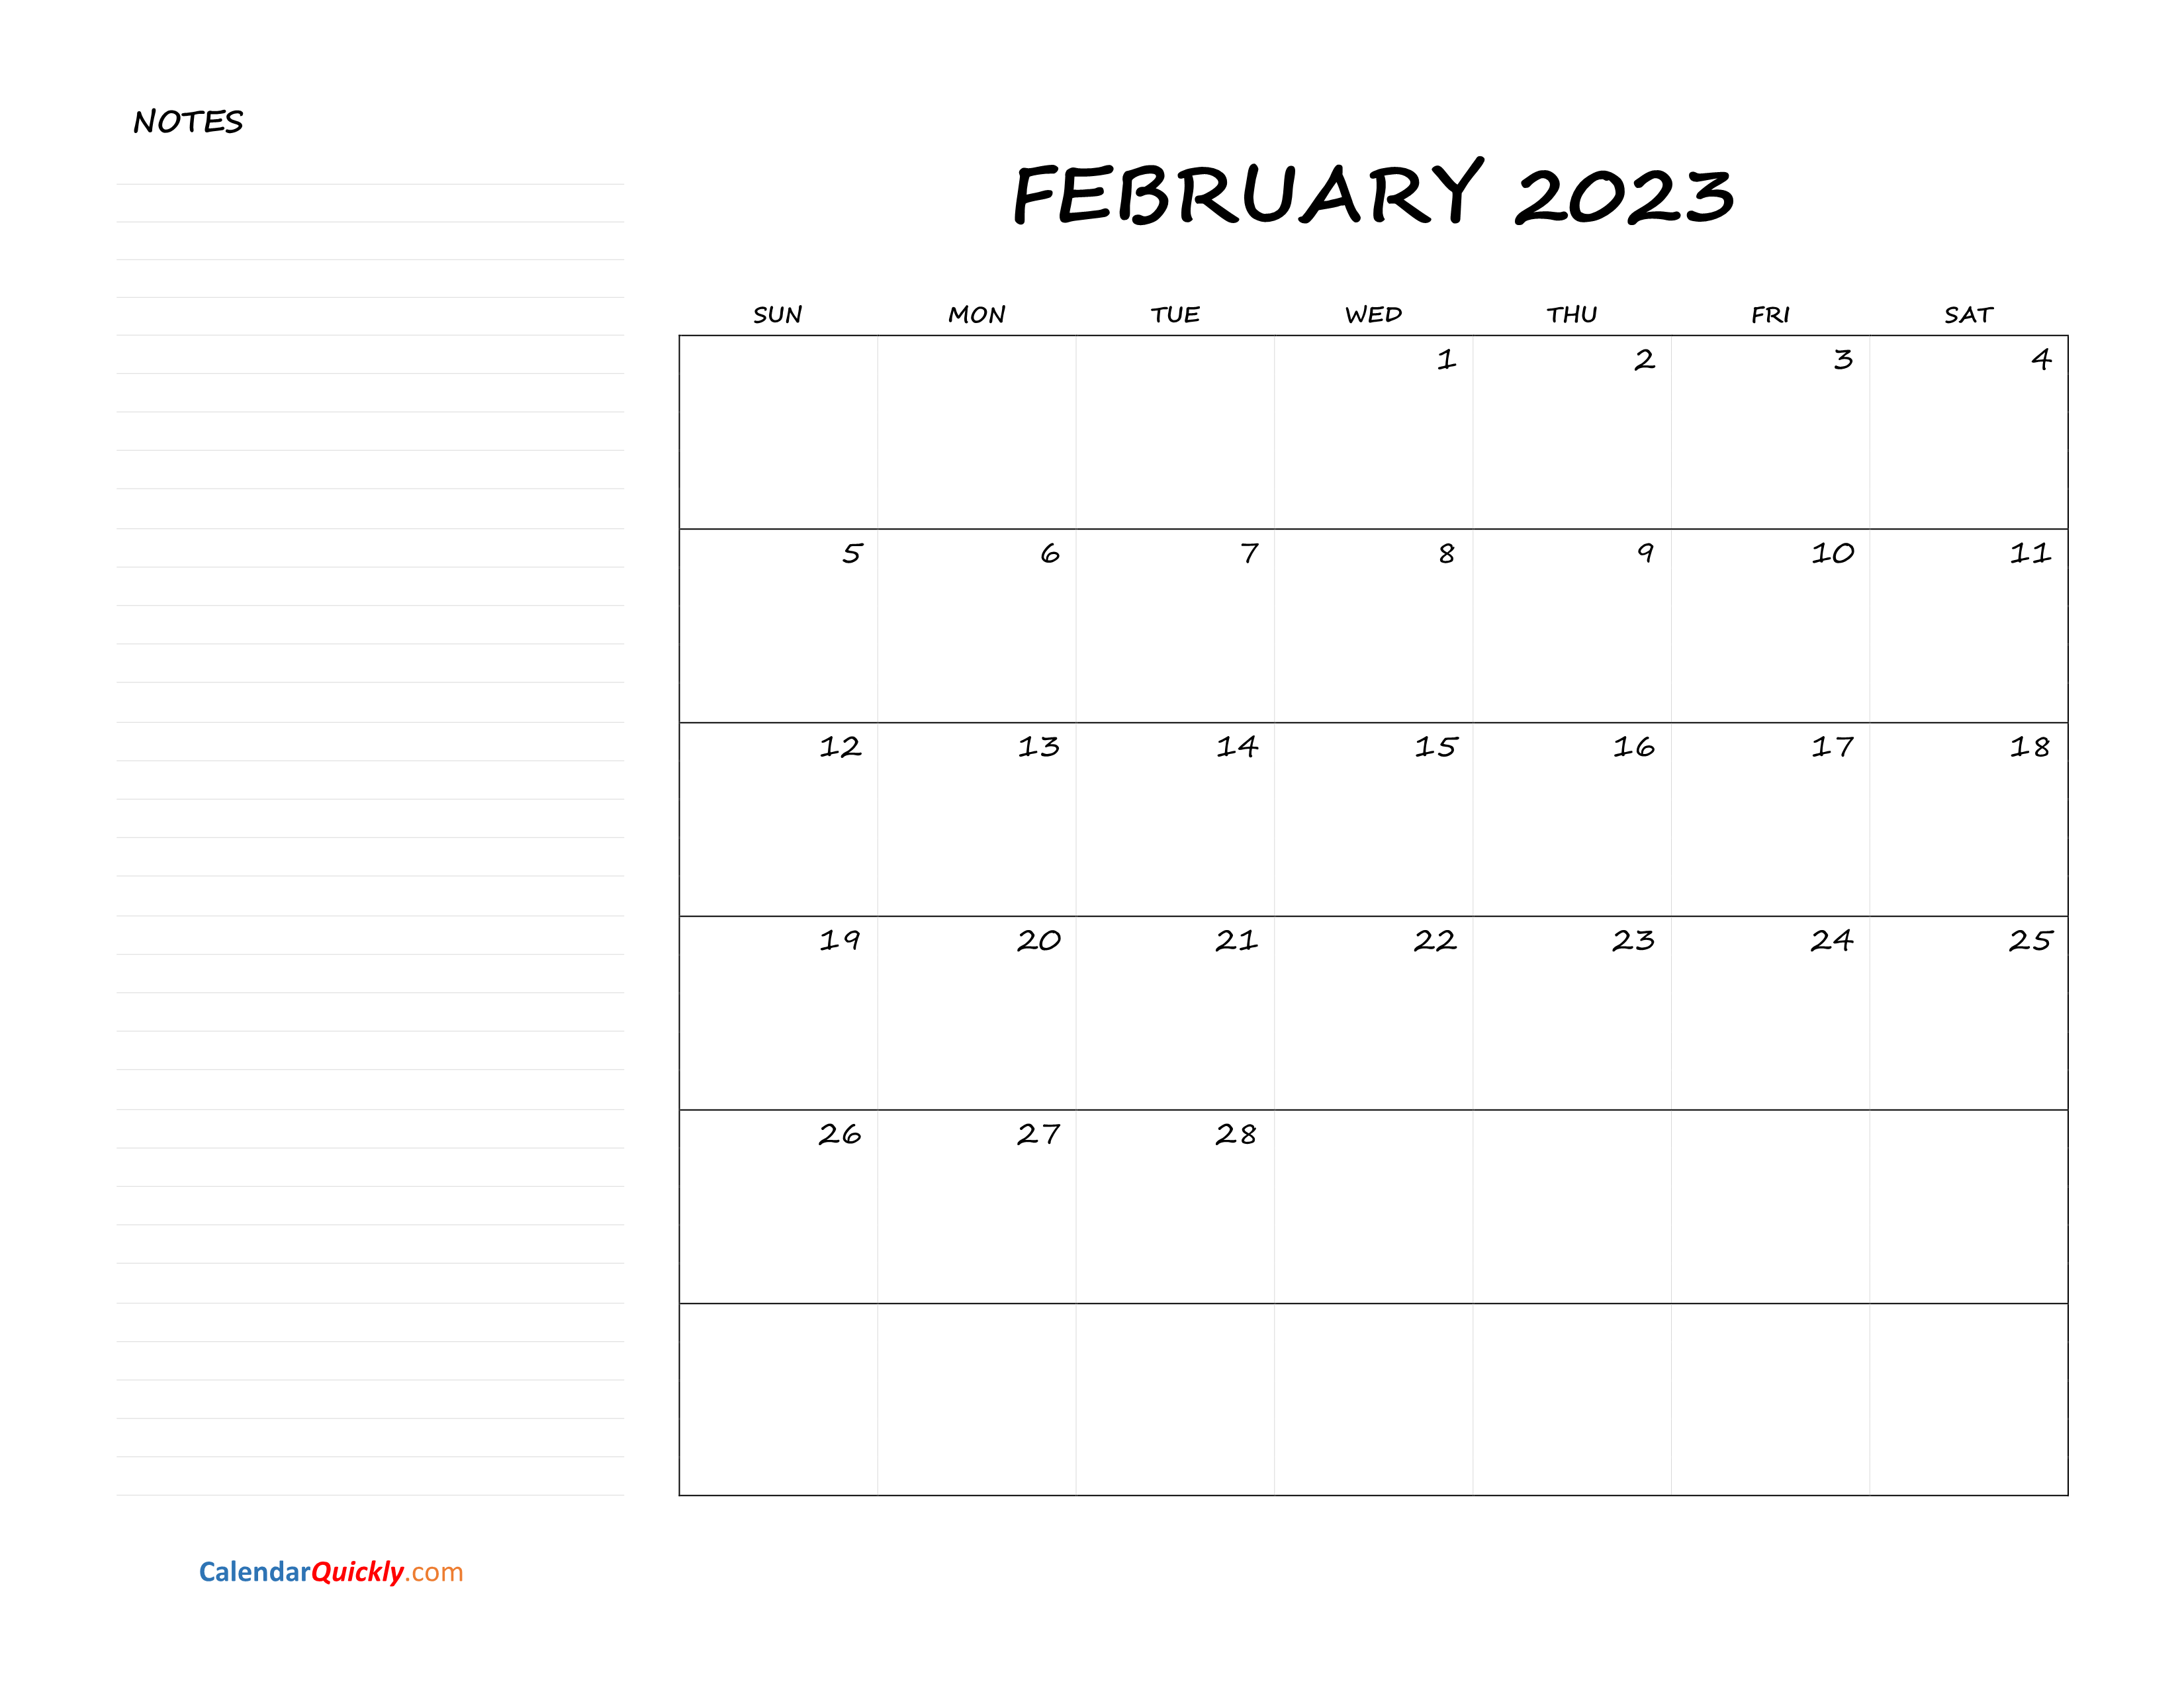 February Blank Calendar 2023 With Notes Calendar Quickly